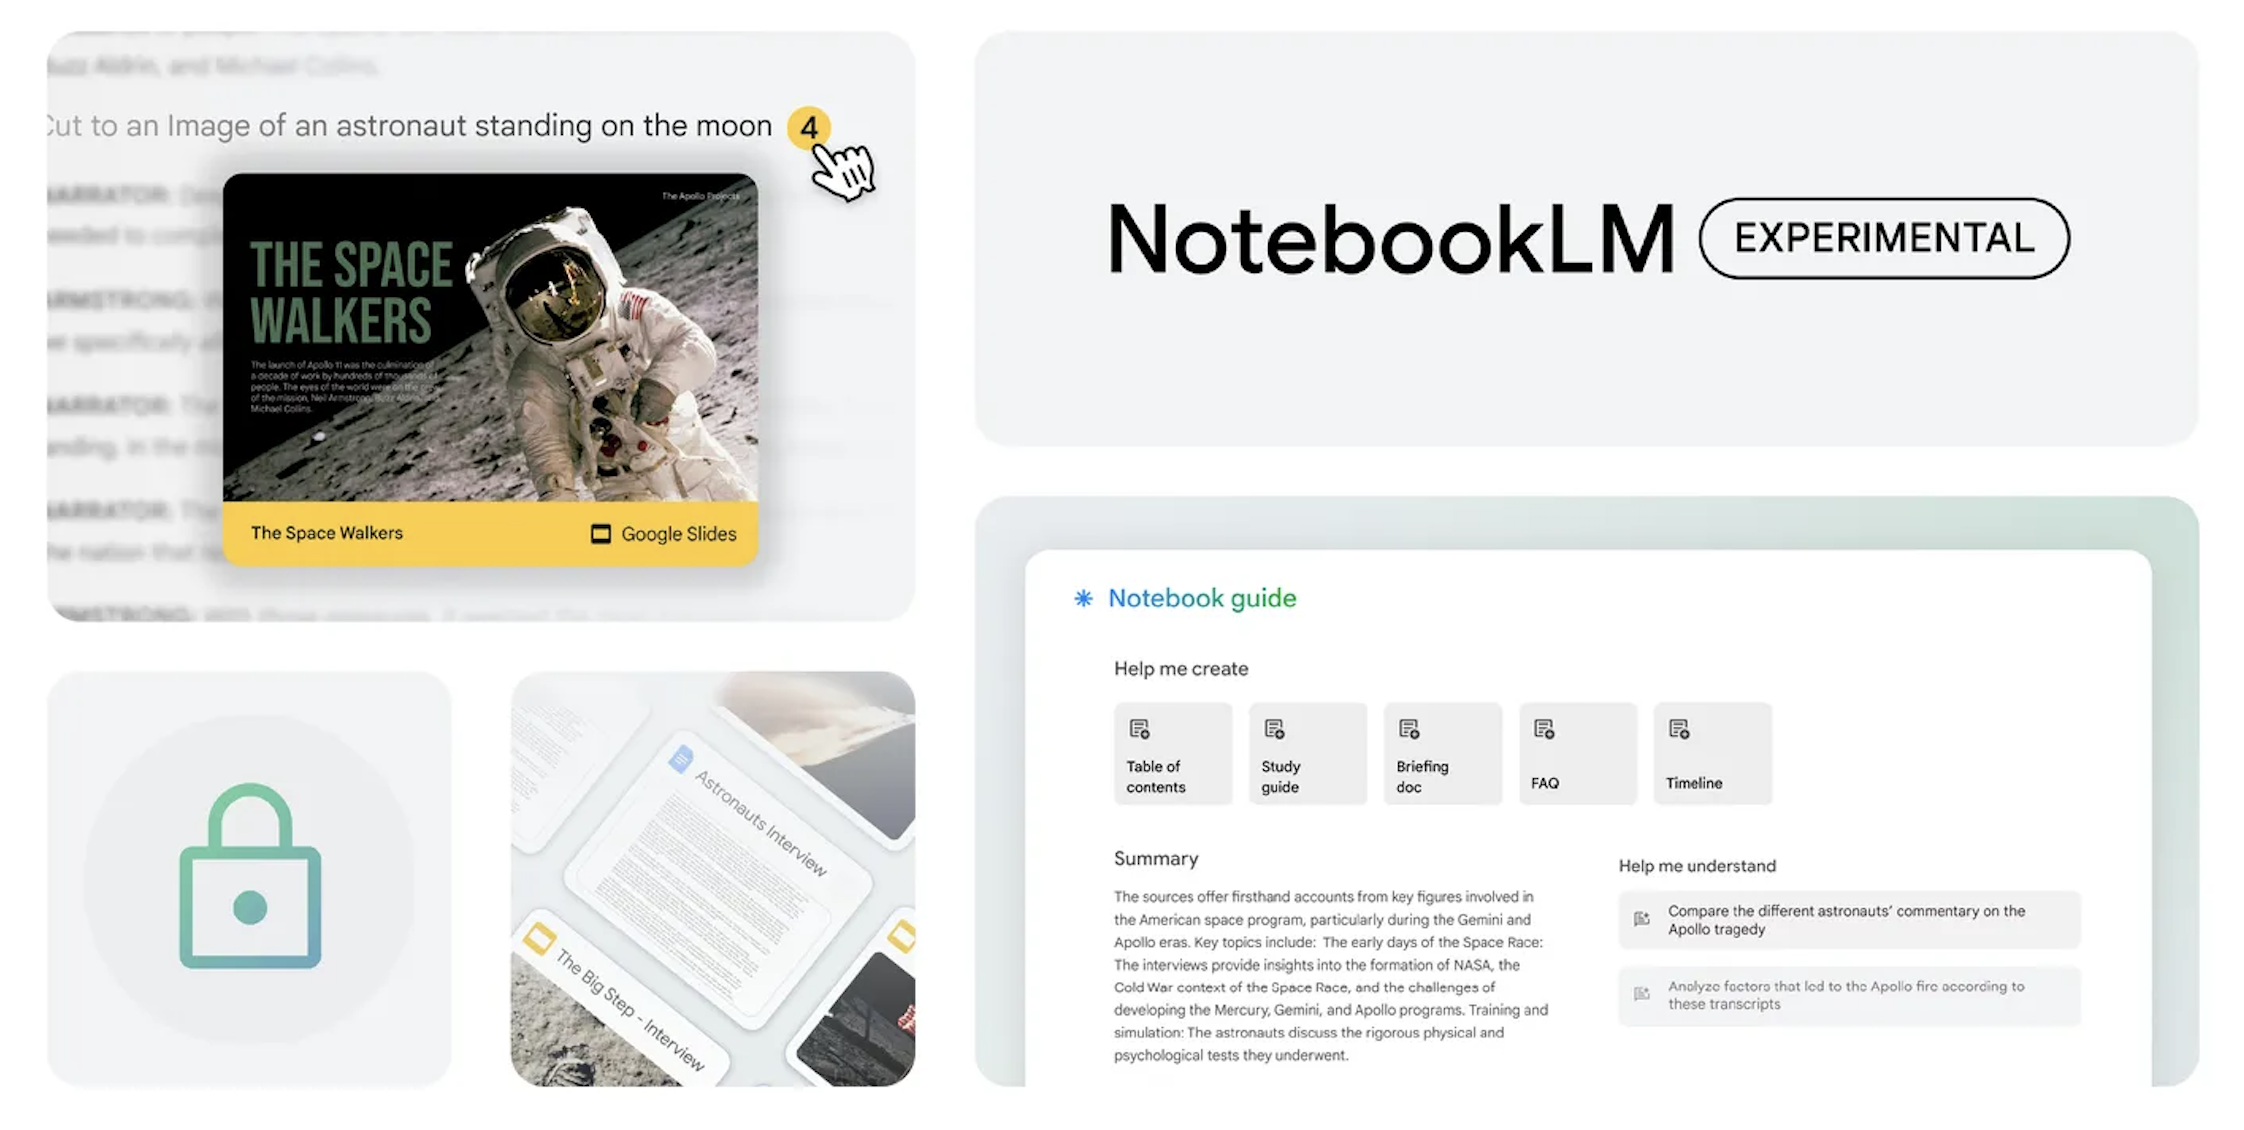 NotebookLM Rolls Out to More Countries Worldwide